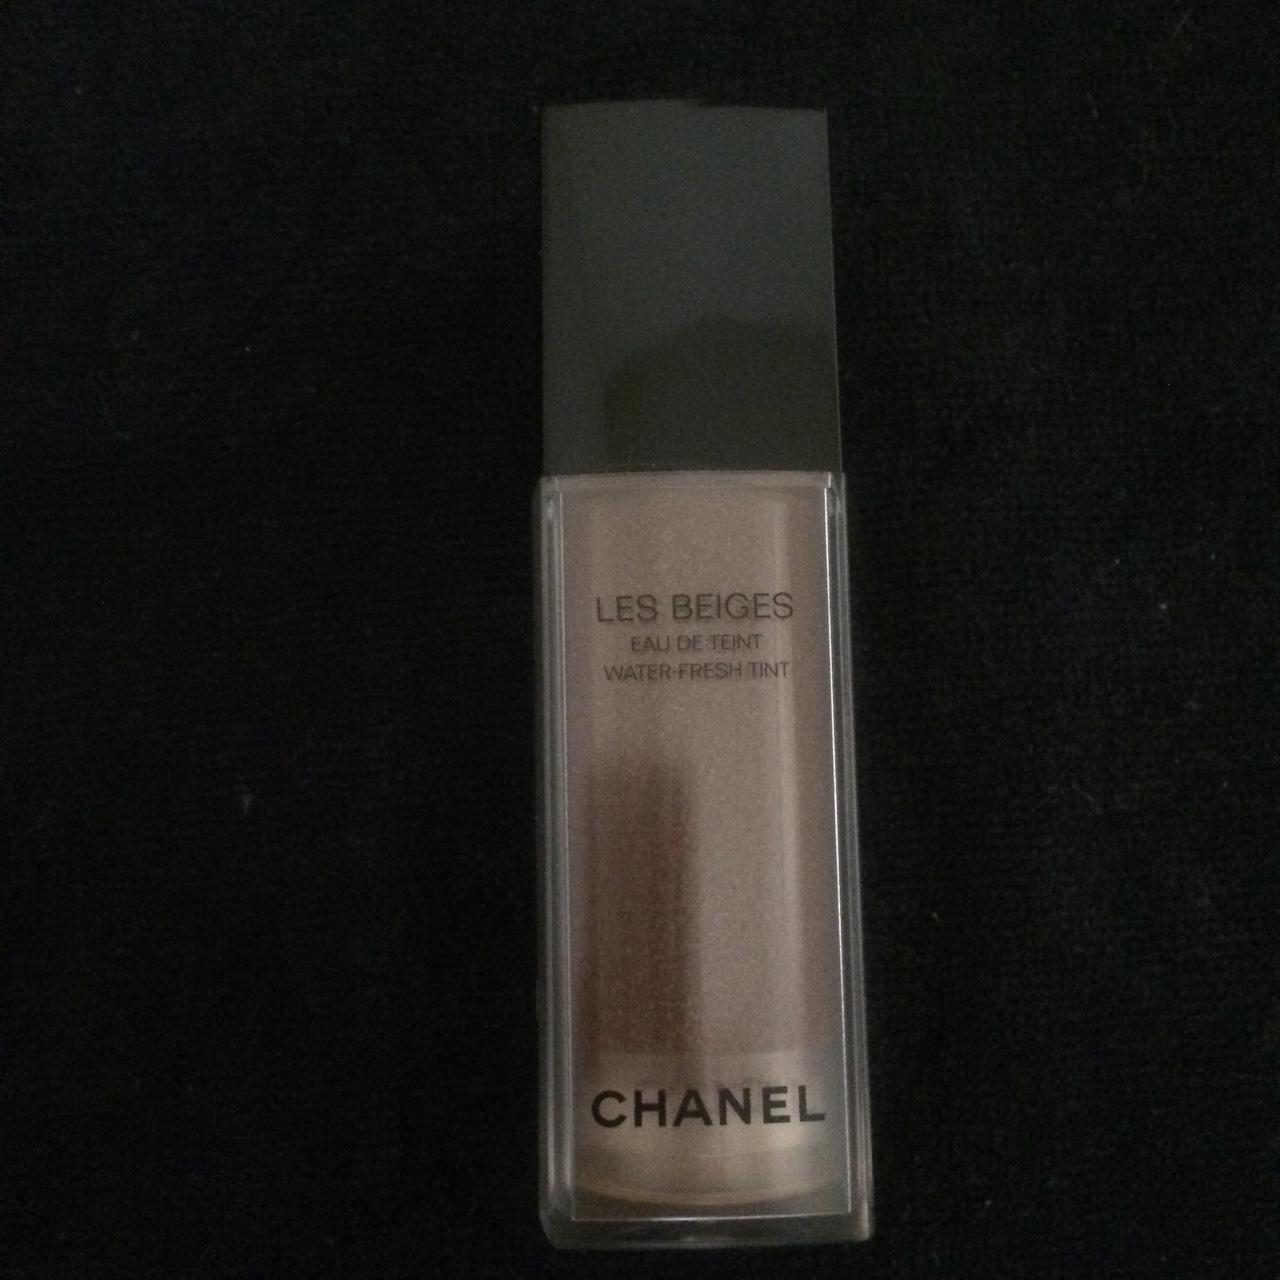 Chanel Les Beiges Water Fresh Tint Medium 1.0 Ounce India